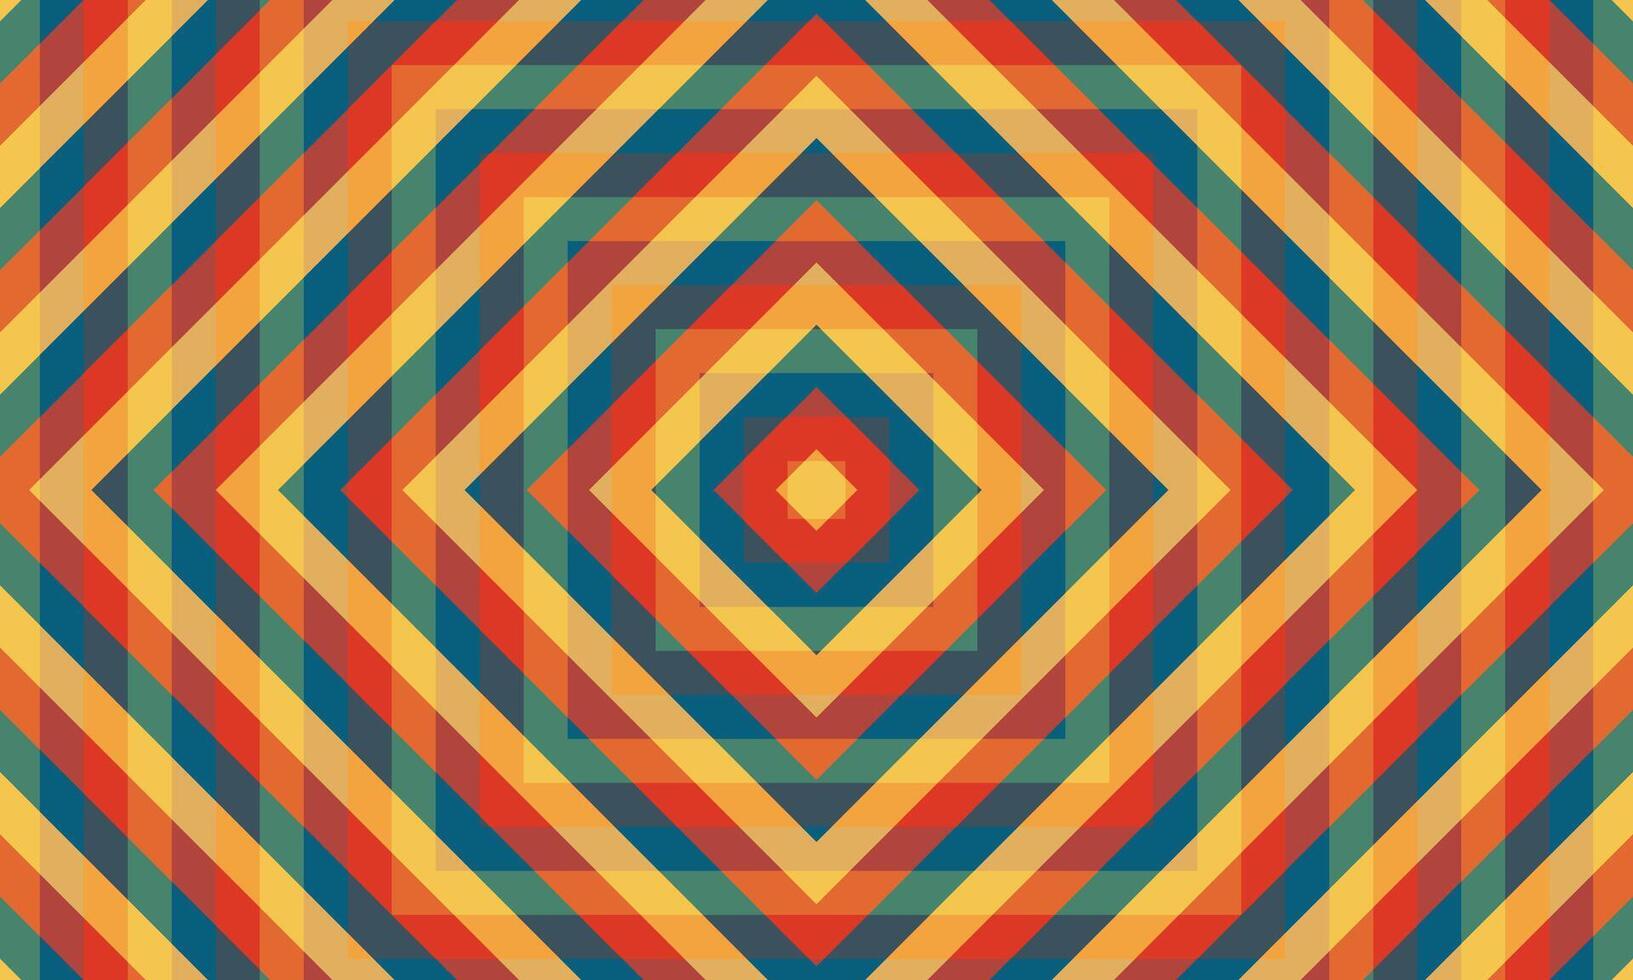 abstract retro psychedelisch trippy achtergrond vector